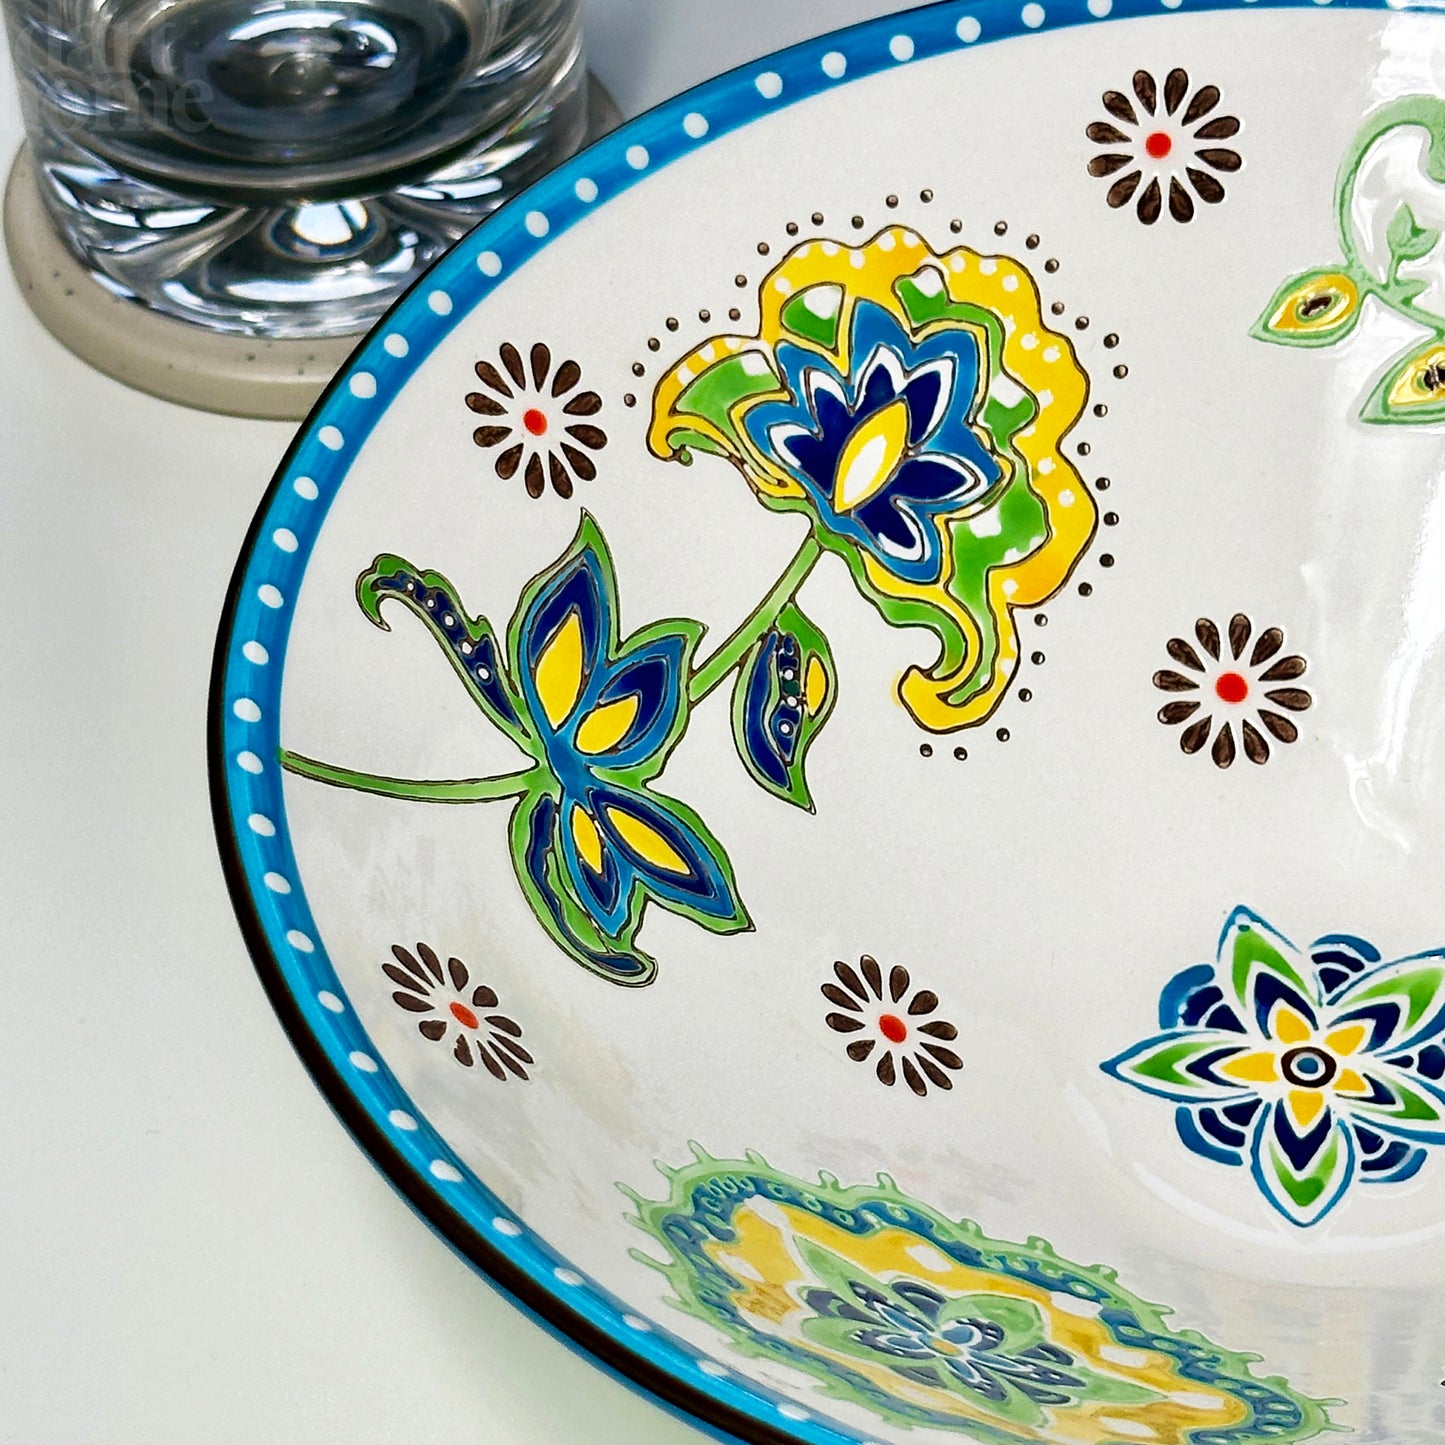 Floral Peacock Patterned Bowl